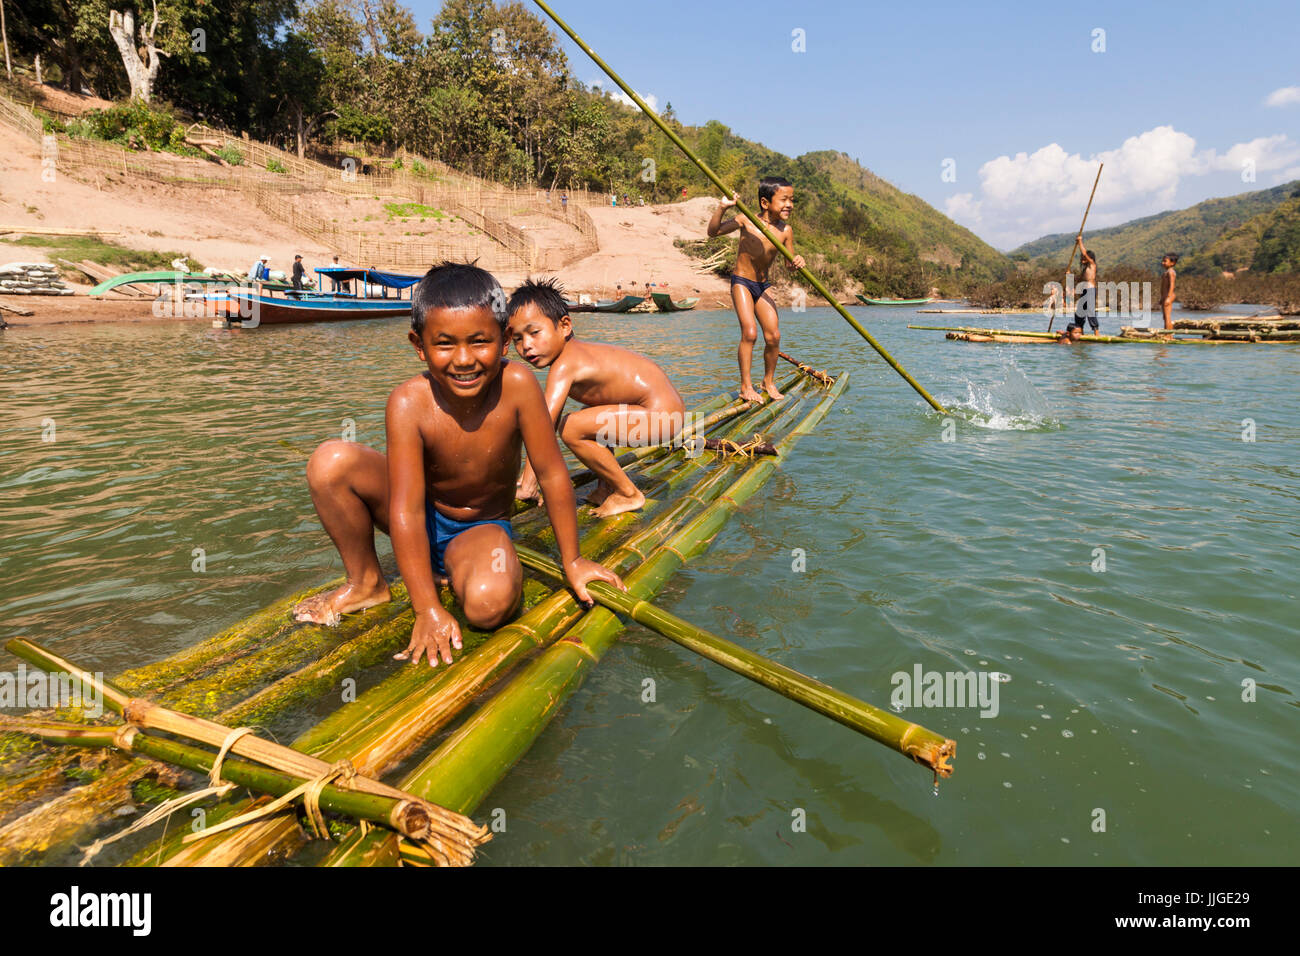 Children play in the Nam Ou River on bamboo rafts at Ban Hat Kham, Laos. The village would be completely inundated by proposed Dam #3 (whose construction has not yet commenced). Stock Photo